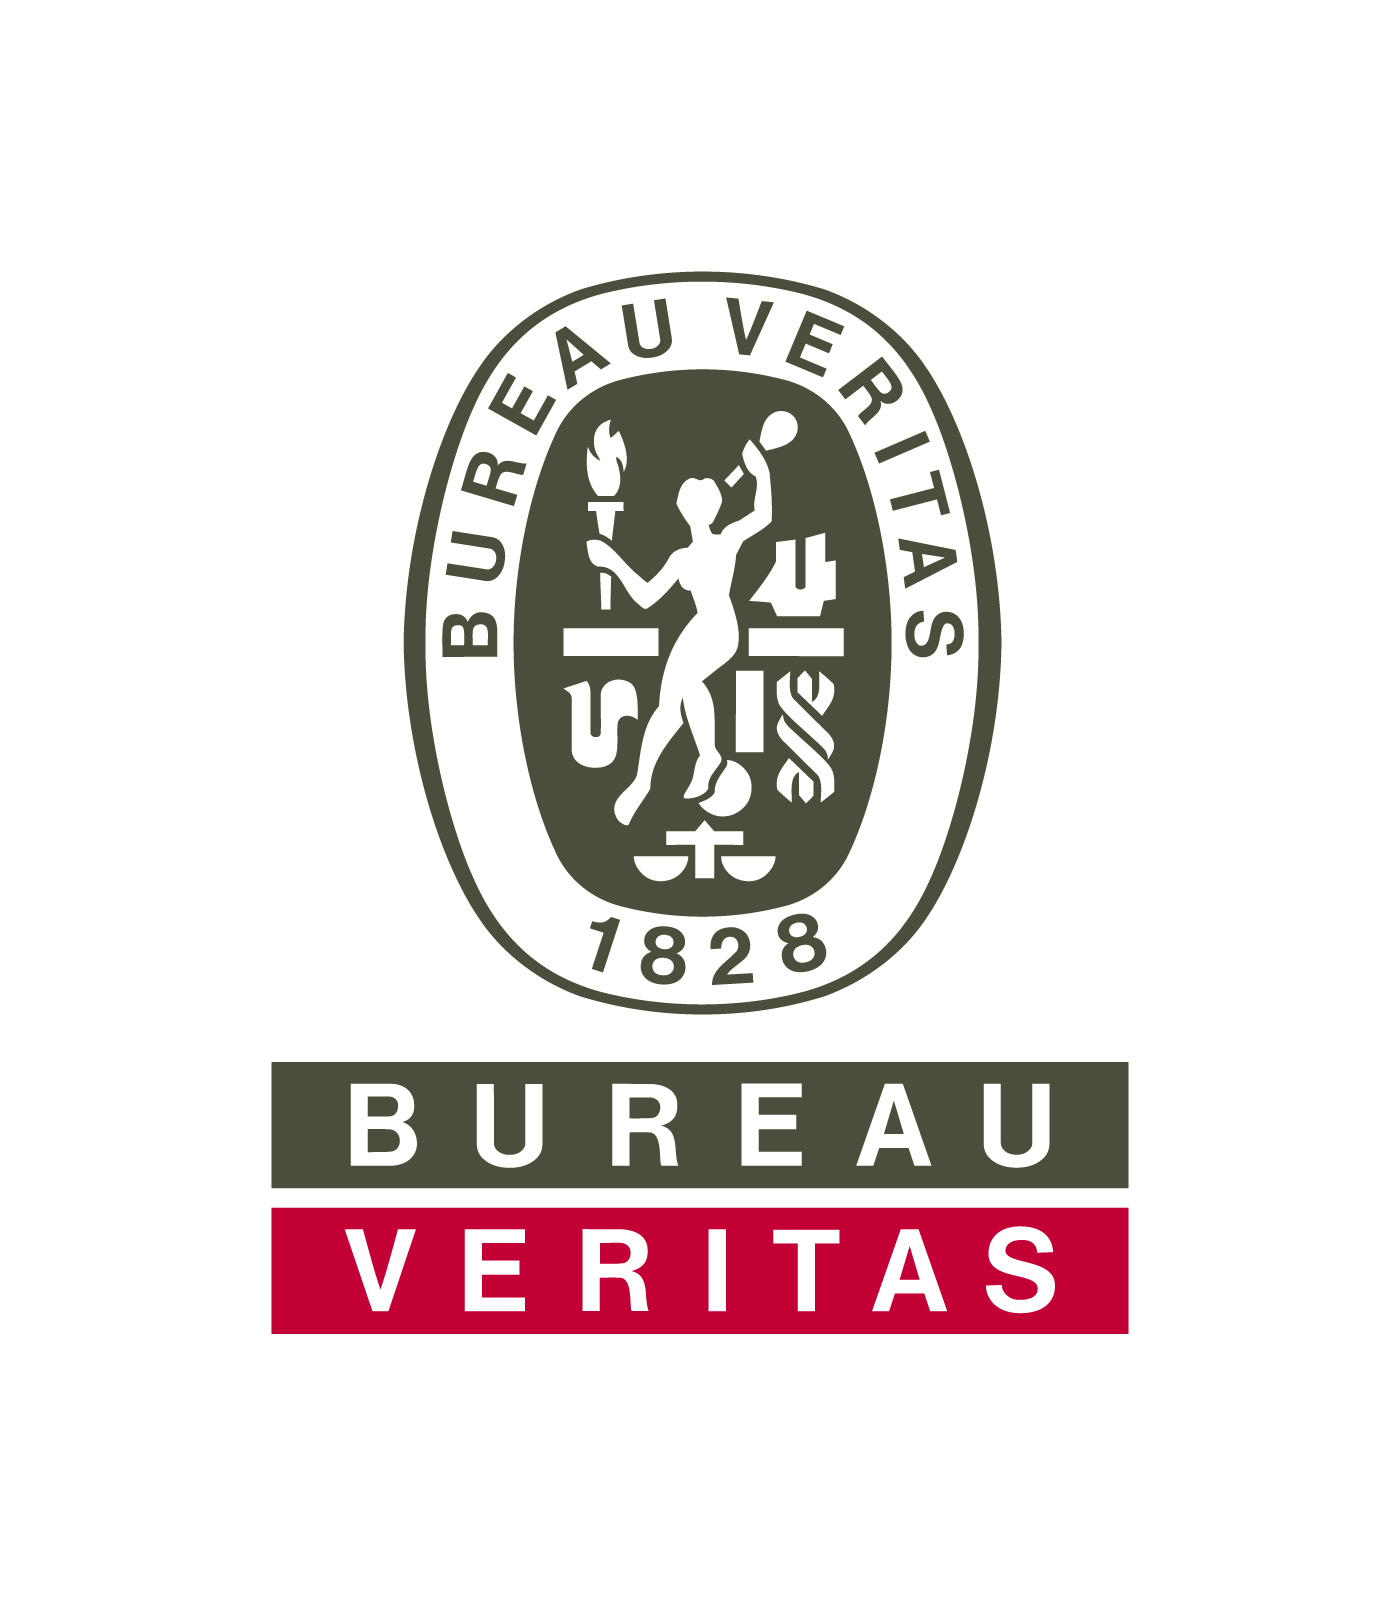 Bureau Veritas continues on its transformation journey to Shaping a Better Workplace